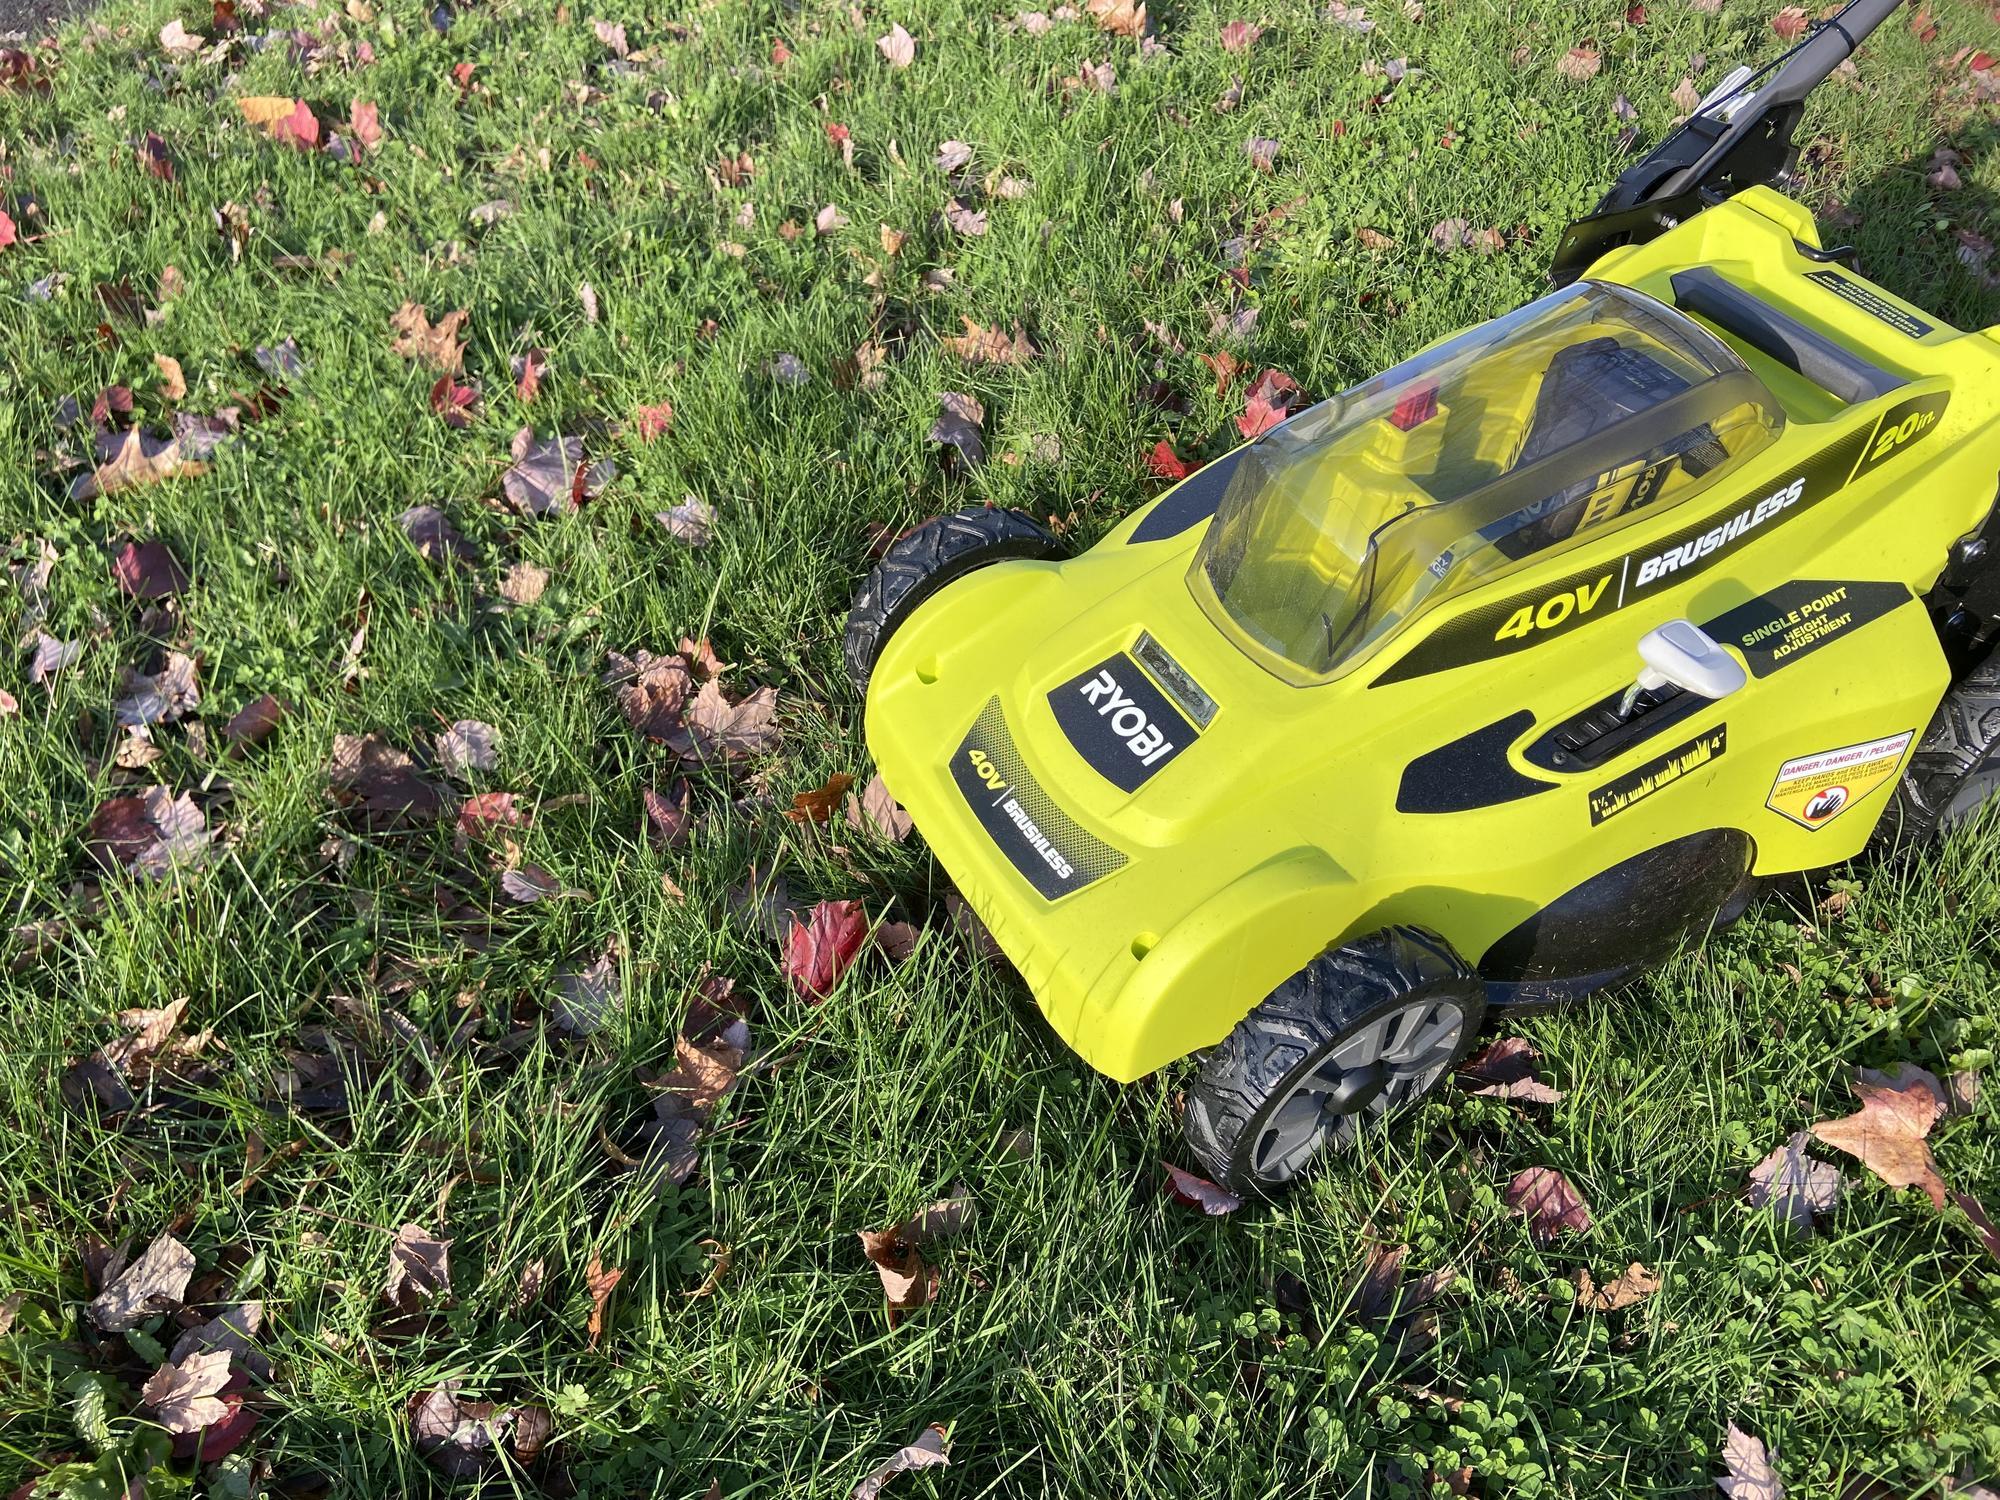 bright green electric lawn mower on lawn with fallen leaves